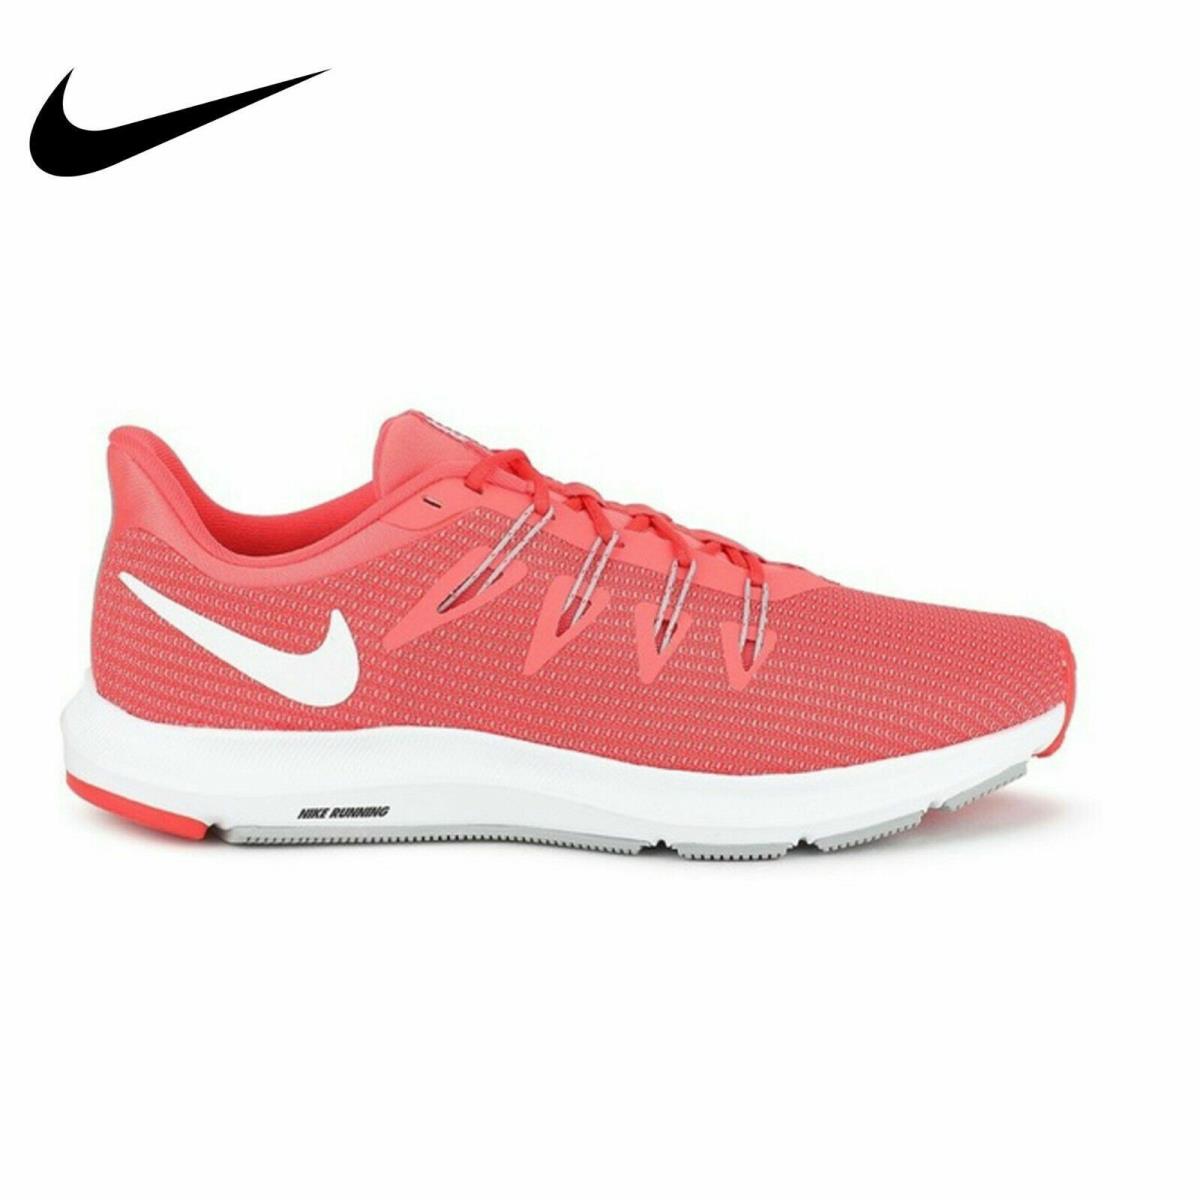 Nike Women`s Quest Running Shoes Ember Glow White AA7412-800 Size 8.5 - 9